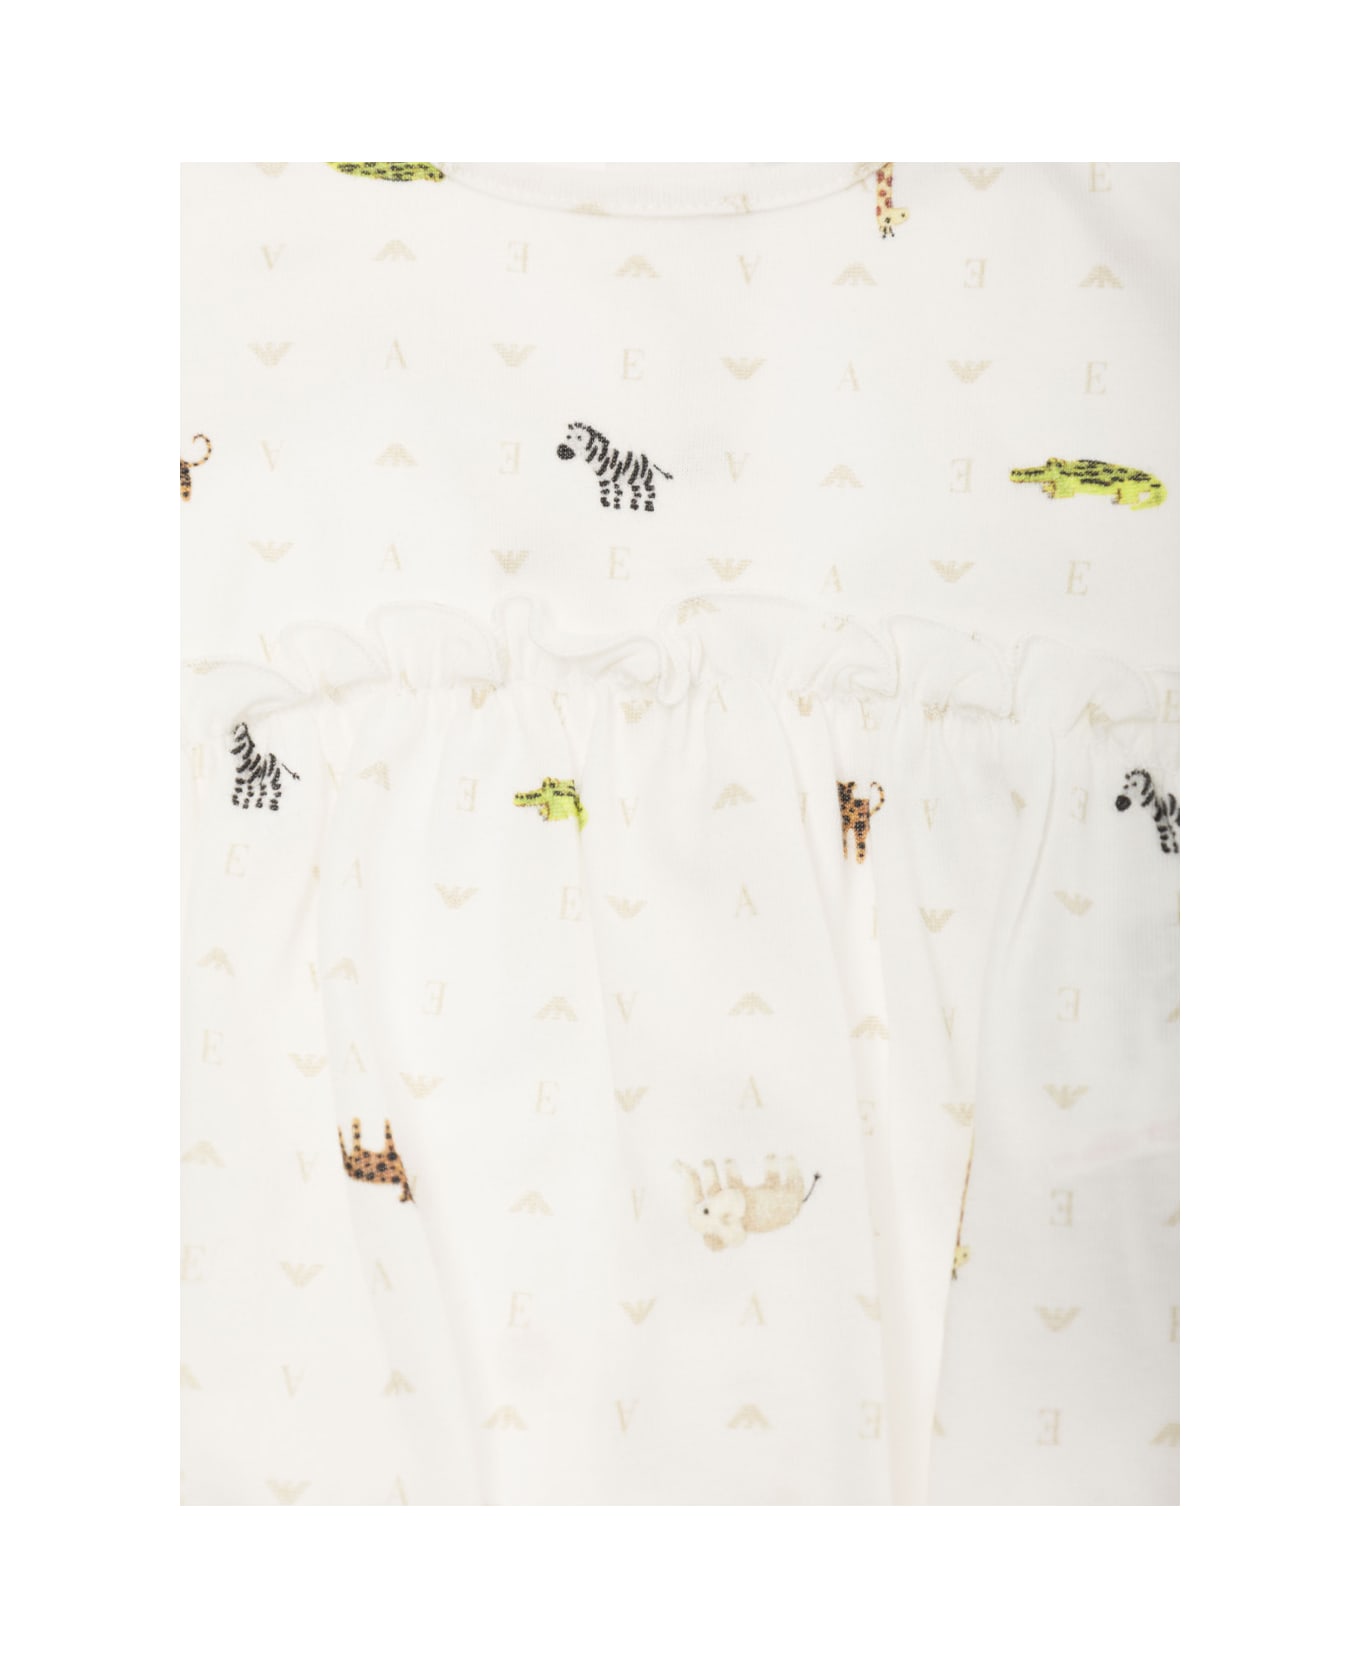 Emporio Armani White Set With Flounces And All-over Animals Print In Cotton Baby - White